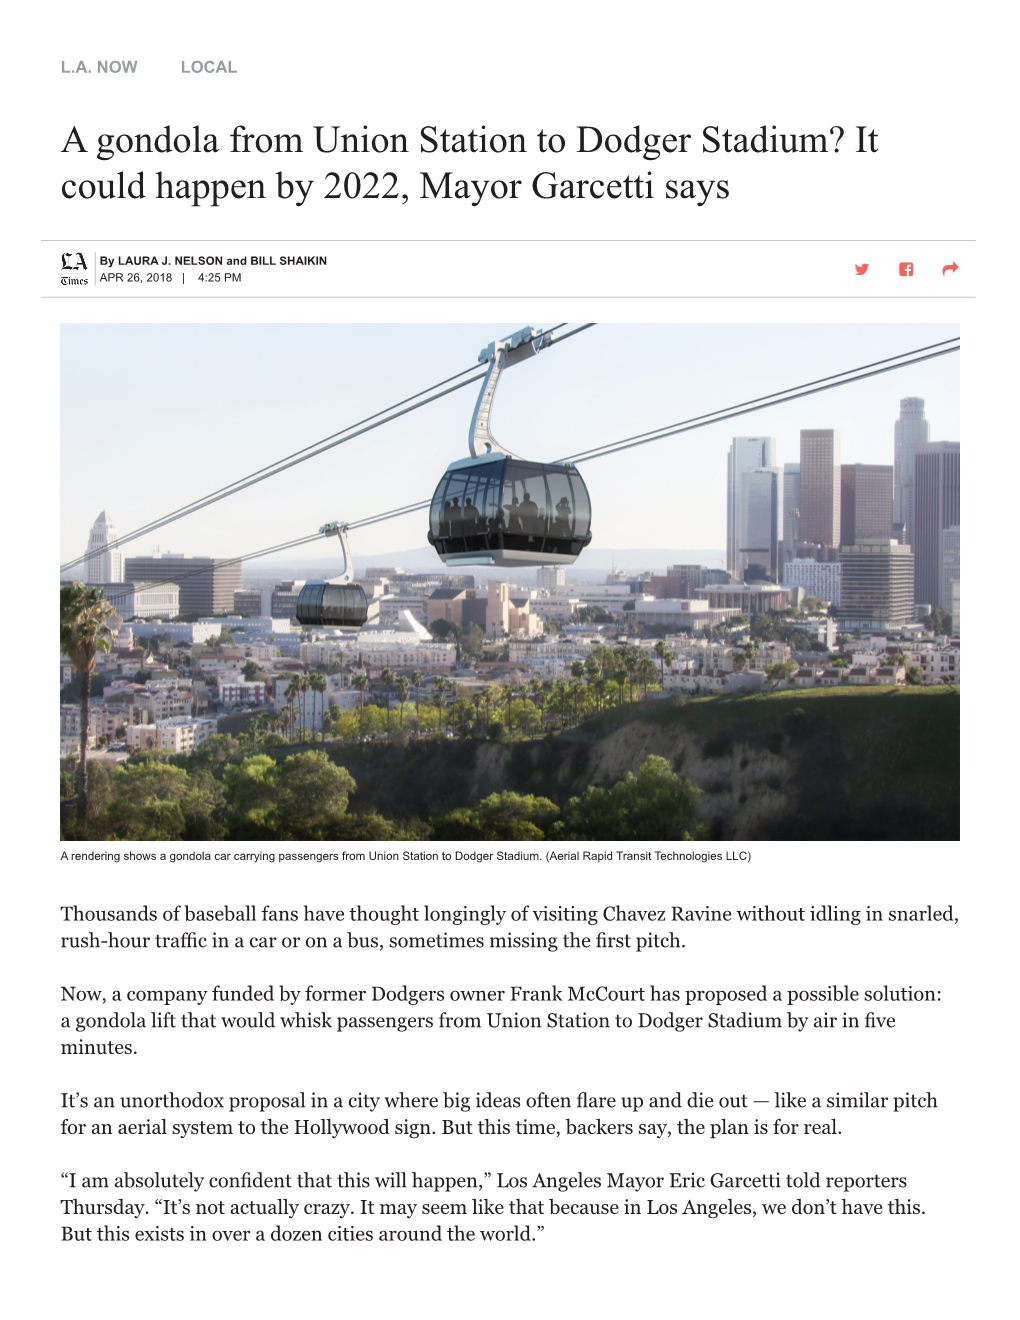 A Gondola from Union Station to Dodger Stadium? It Could Happen by 2022, Mayor Garcetti Says